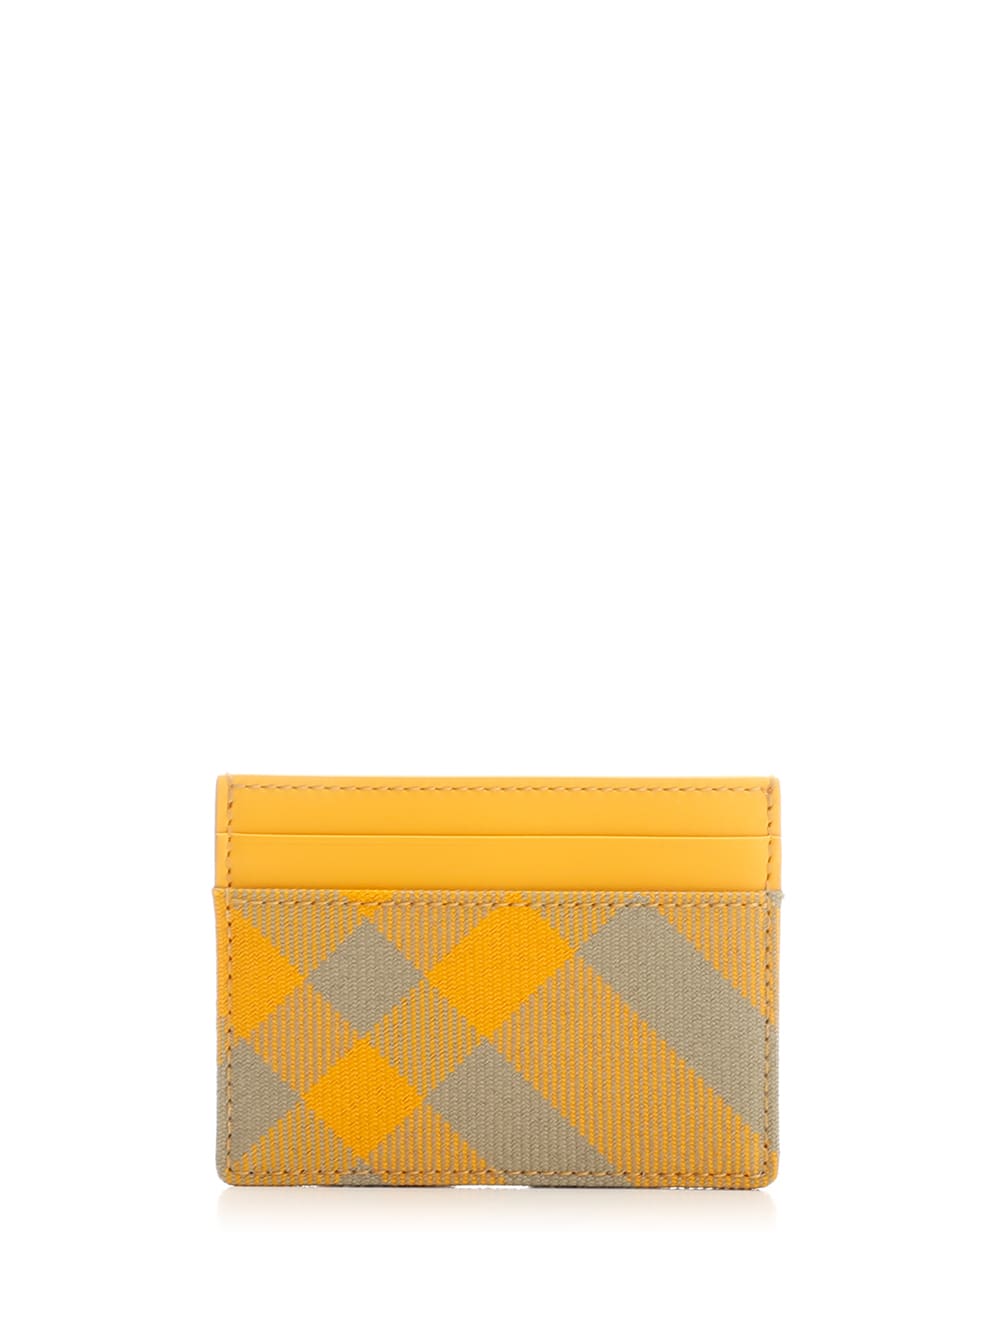 BURBERRY WOOL AND LEATHER CARD HOLDER